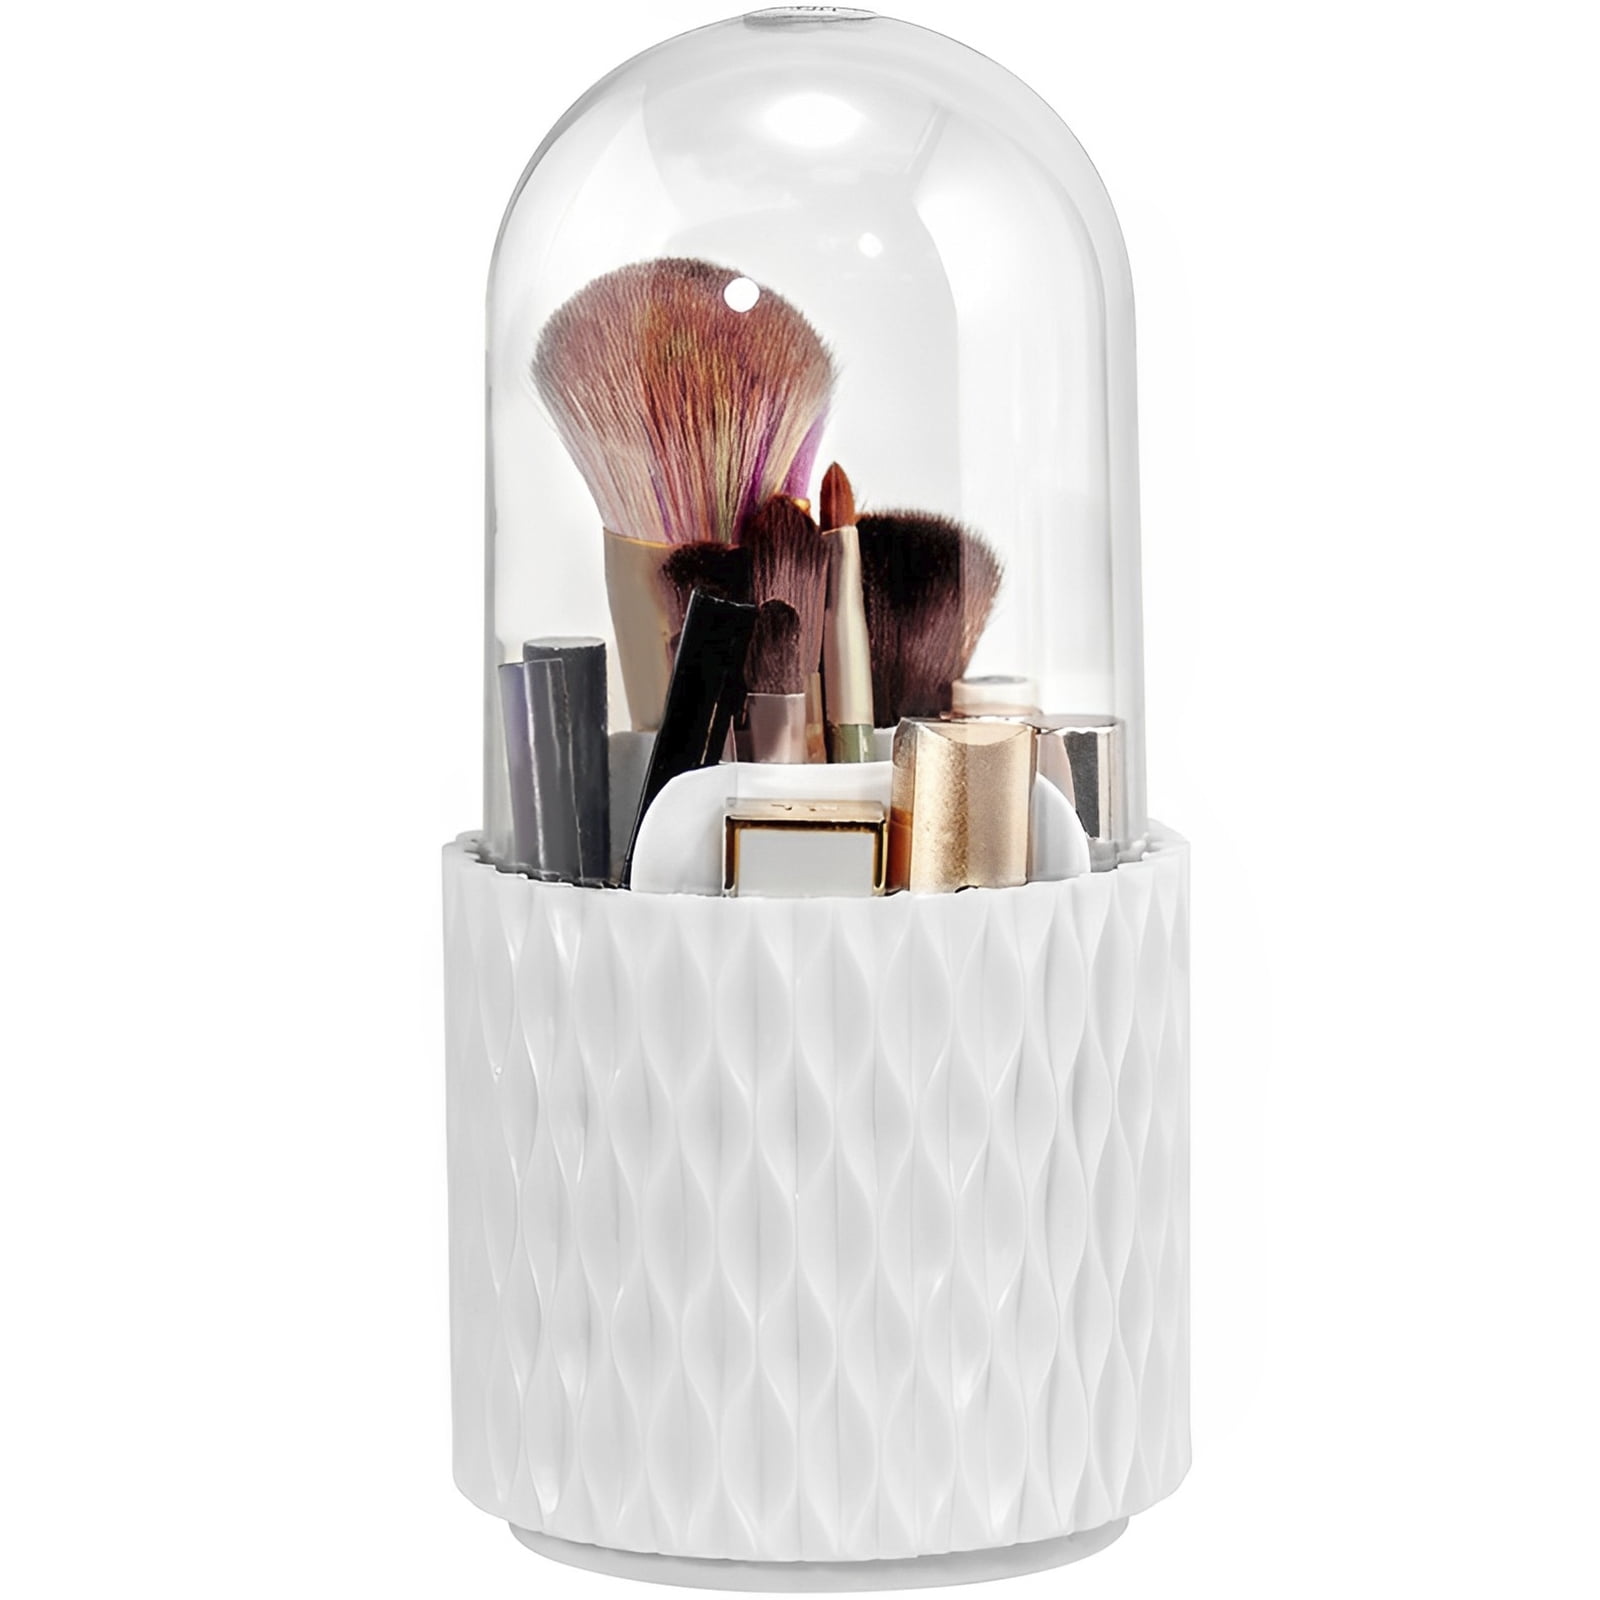  LIVAZIO Makeup Brush Holder With Lid,Rotating Makeup Brush  Storage Box With Cover, Pen Holder For Desk,Makeup Eyeliner Lip Liner  Holder Organizer For Vanity,Bathroom,Countertop : Beauty & Personal Care